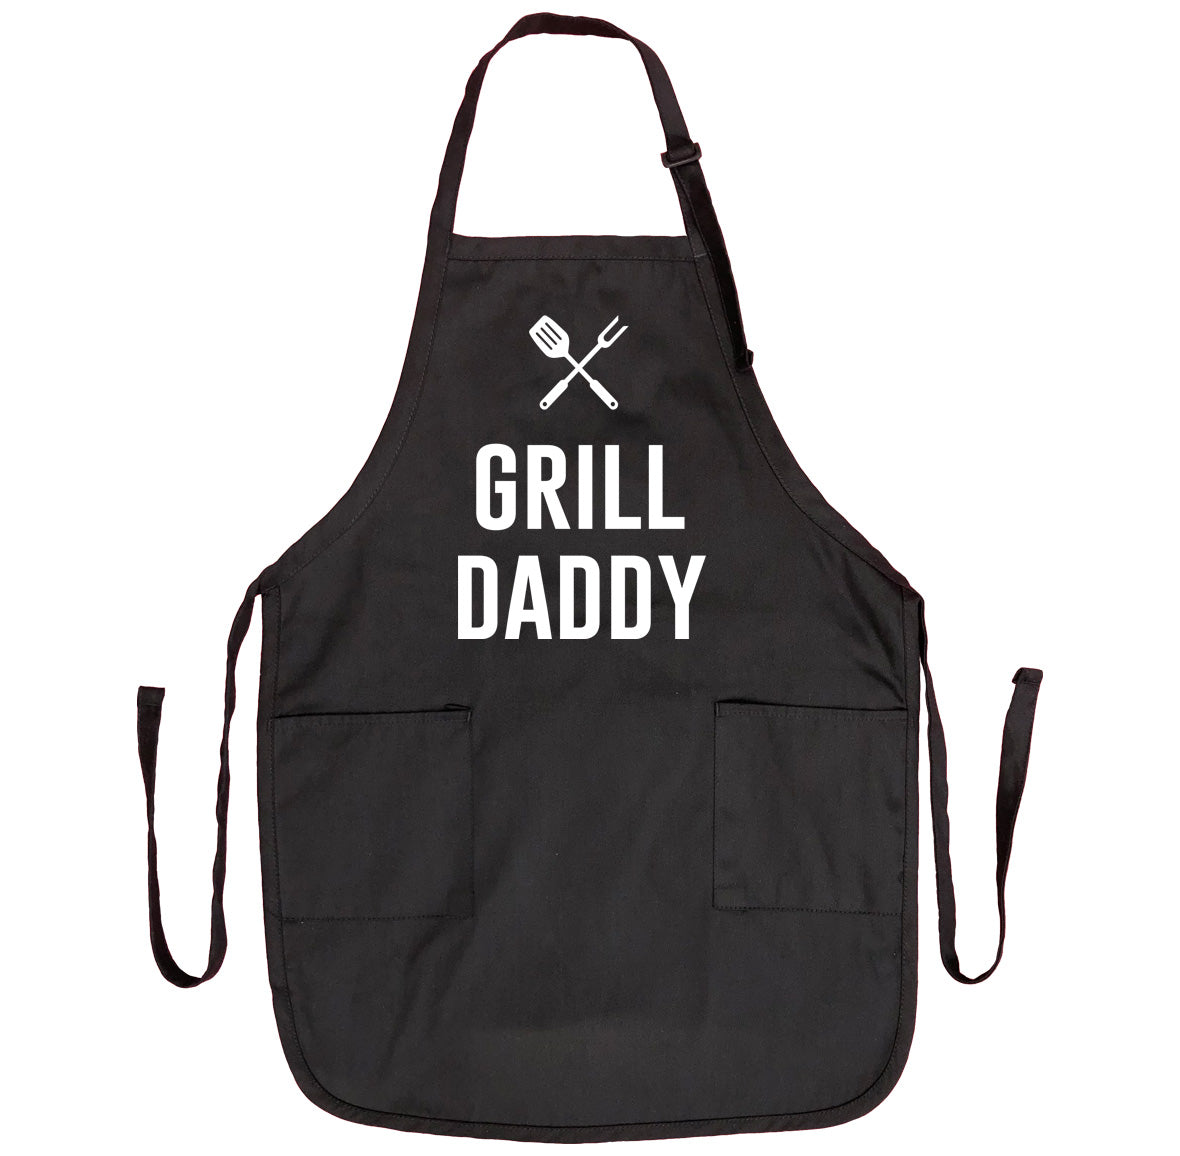 Grill Daddy - Grill Apron - Funny Apron - familyteeprints